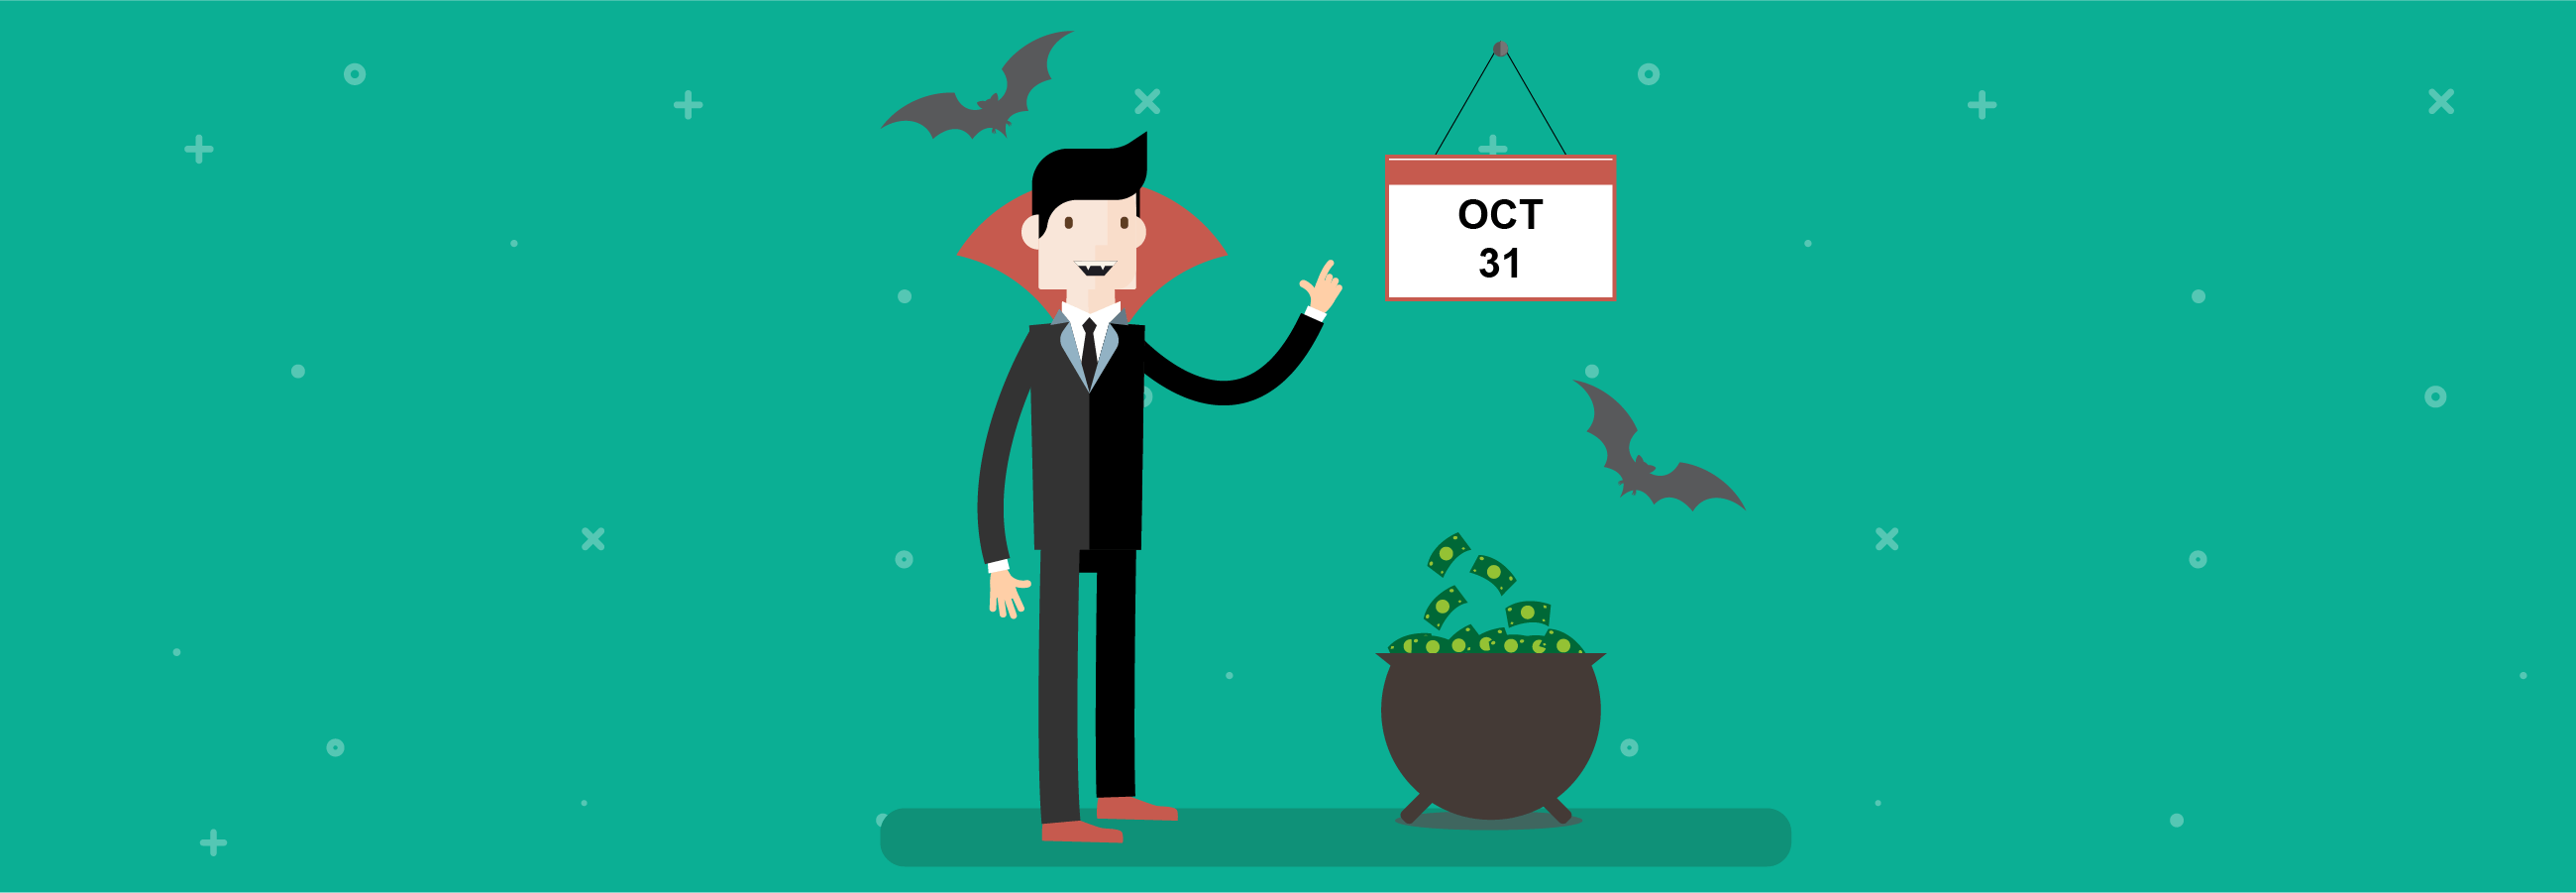 Why October spooks investors